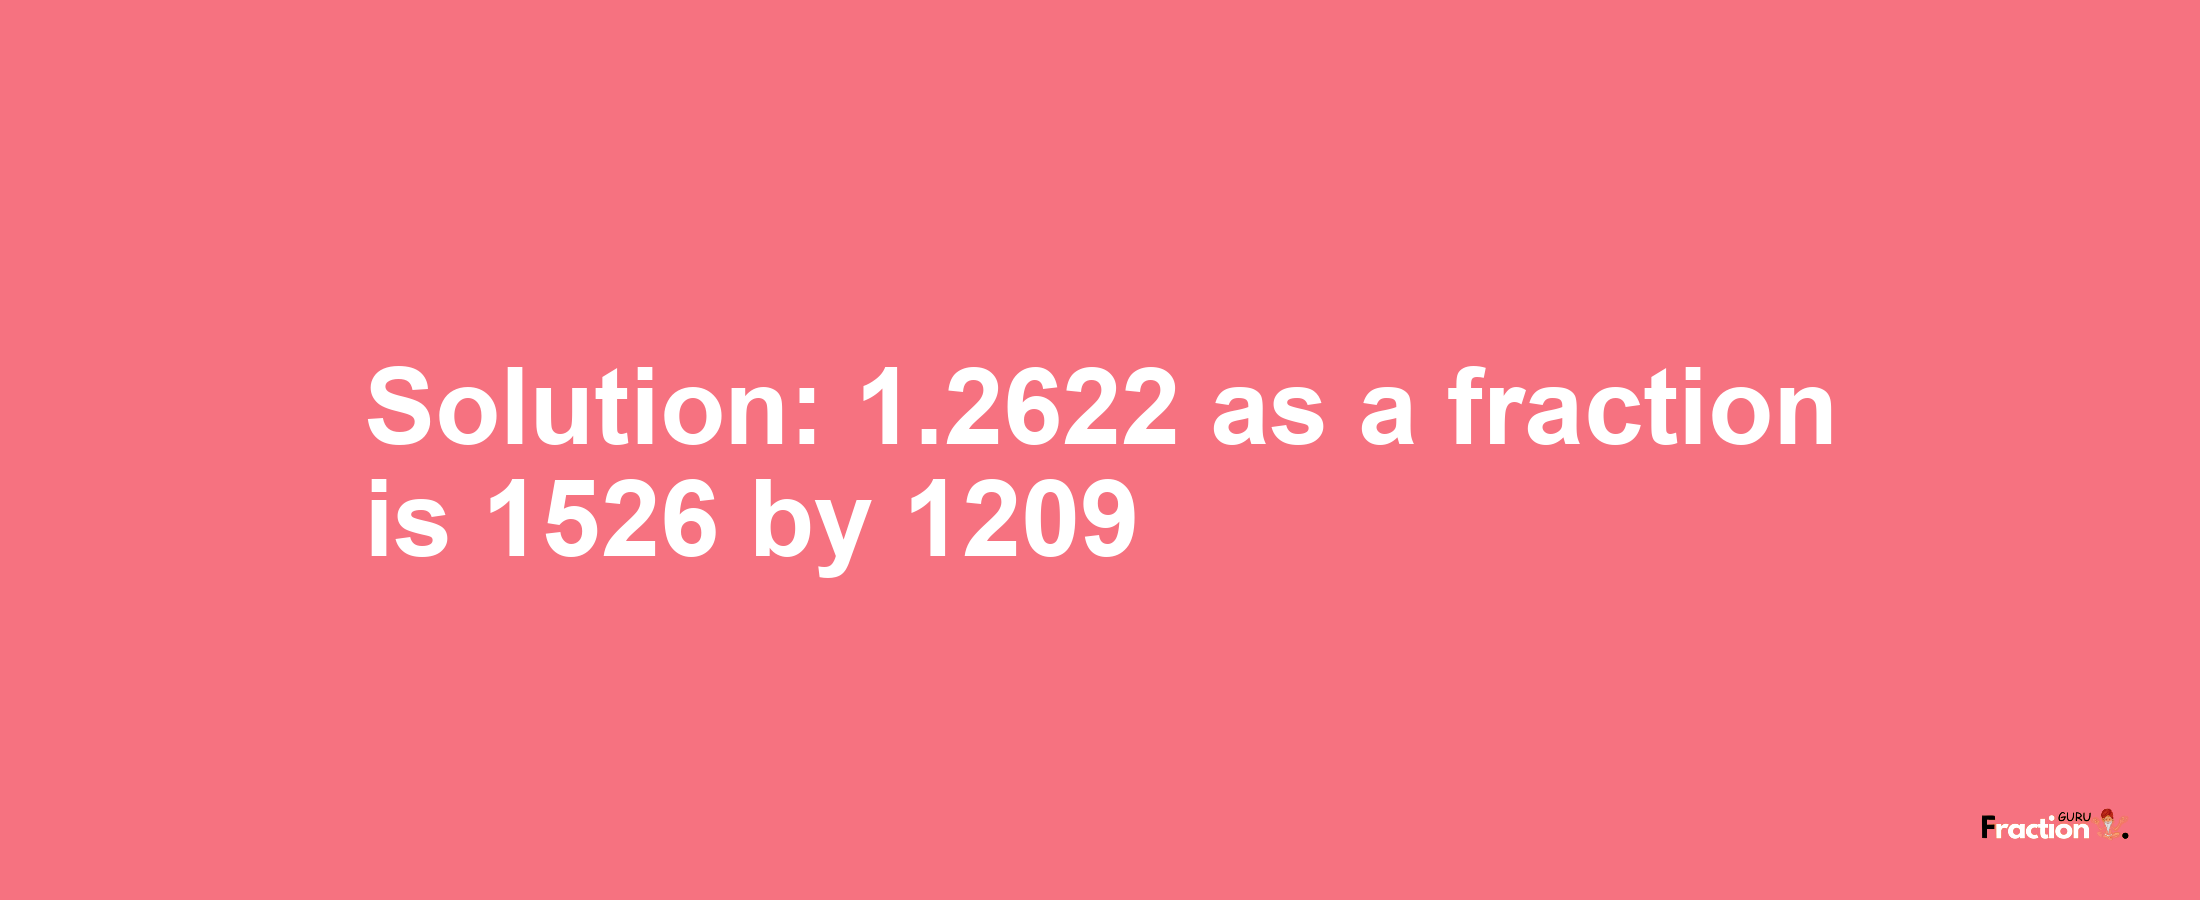 Solution:1.2622 as a fraction is 1526/1209